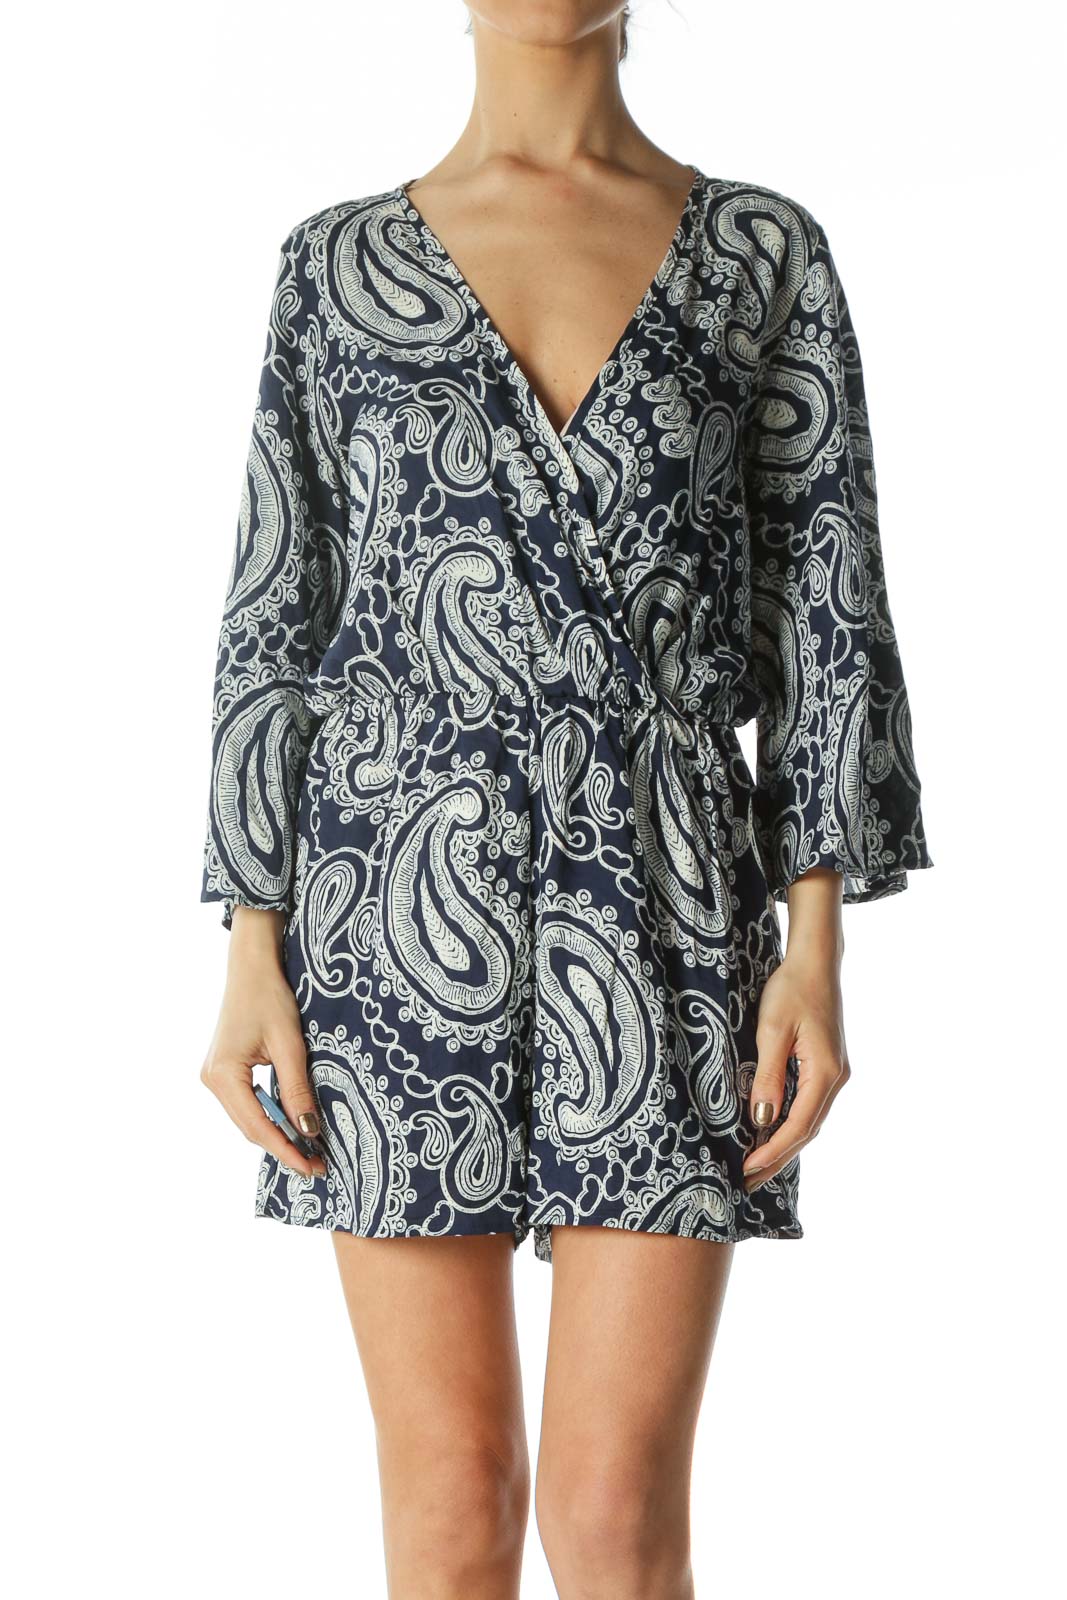 Navy Blue and White Patterned Romper with Bell Sleeves Front